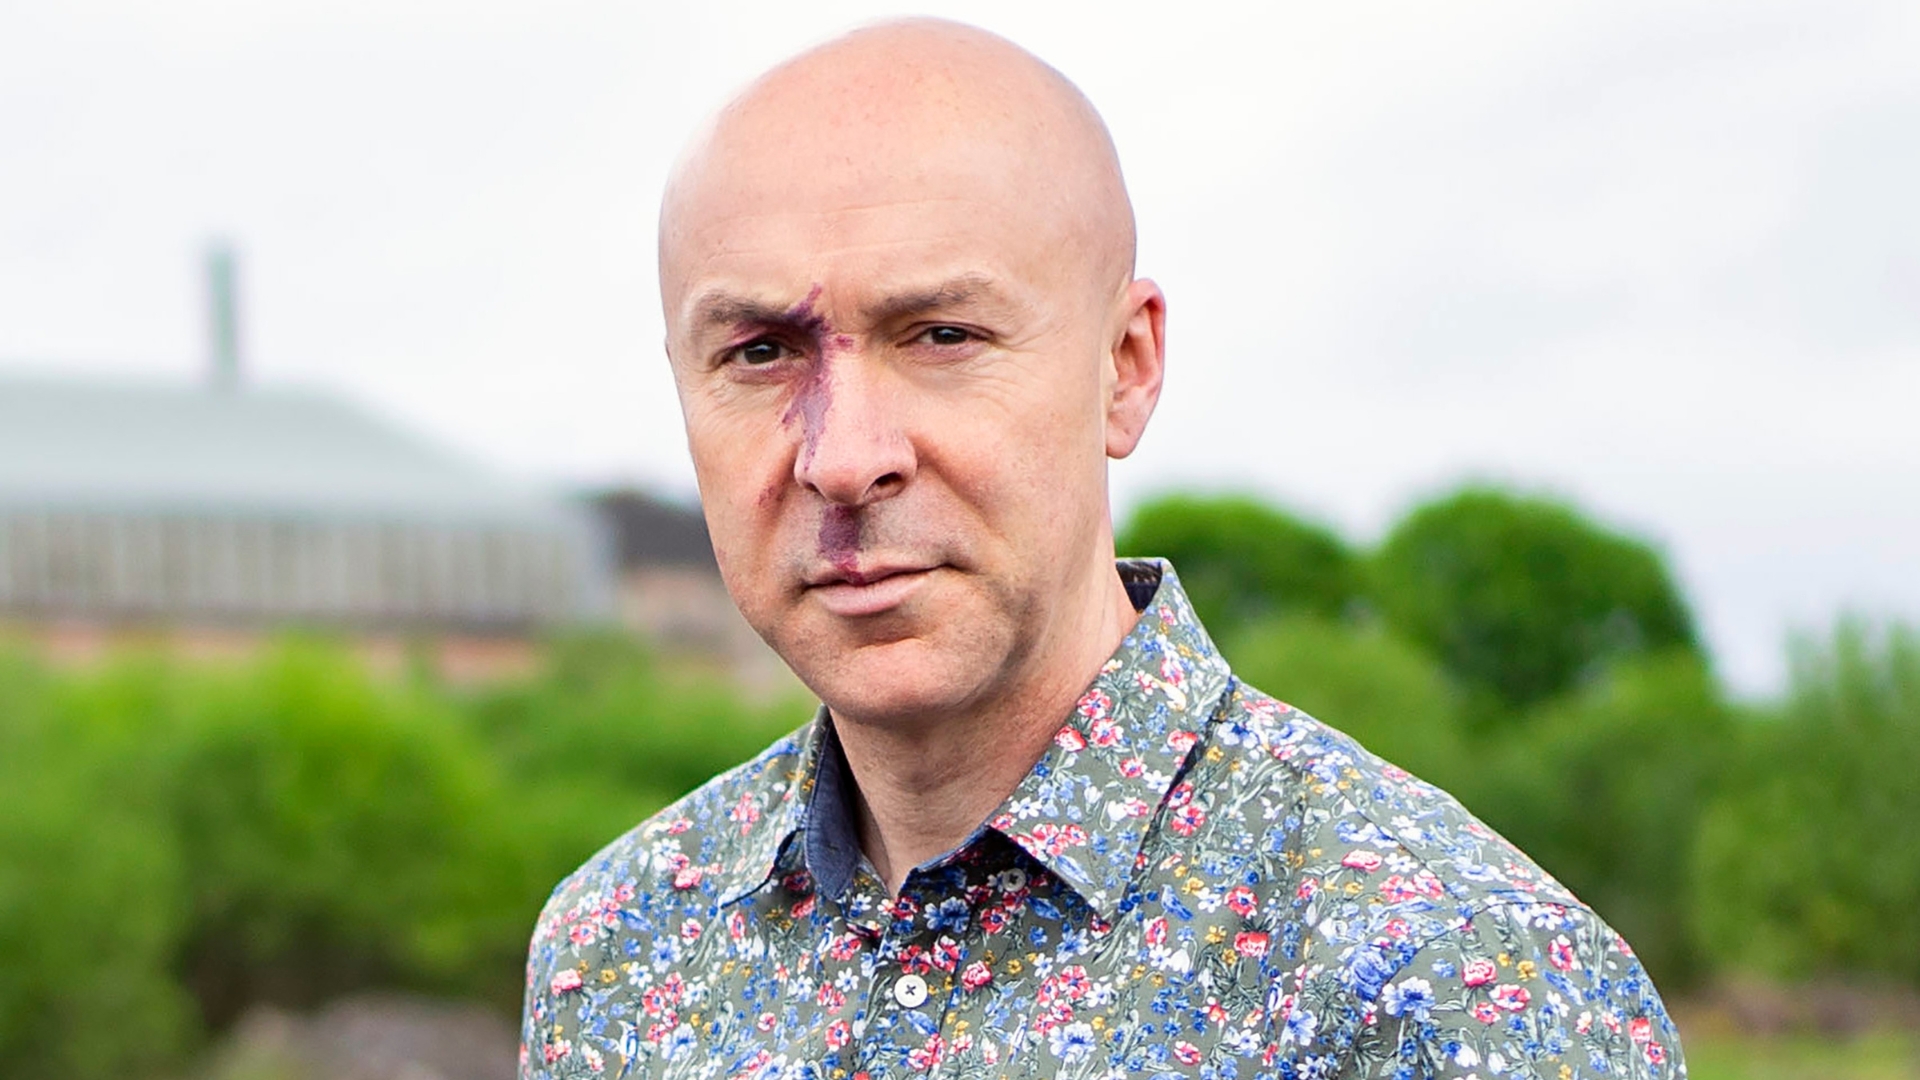 Billingham and Brookmyre named in full programme for Theakston Old Peculier Crime Writing Festival